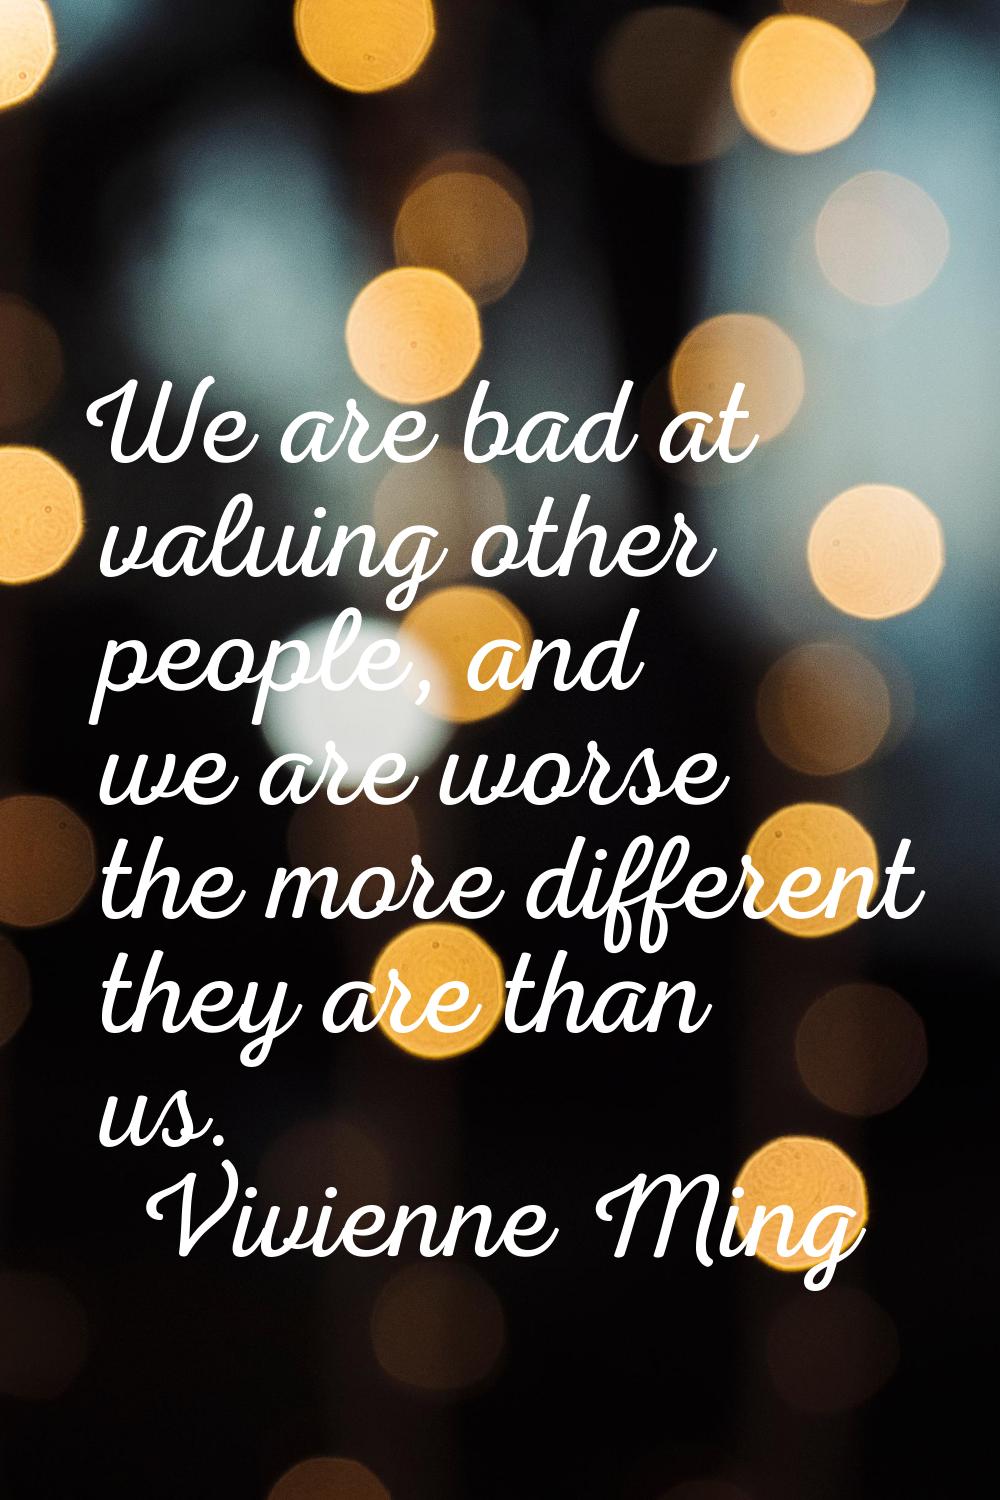 We are bad at valuing other people, and we are worse the more different they are than us.